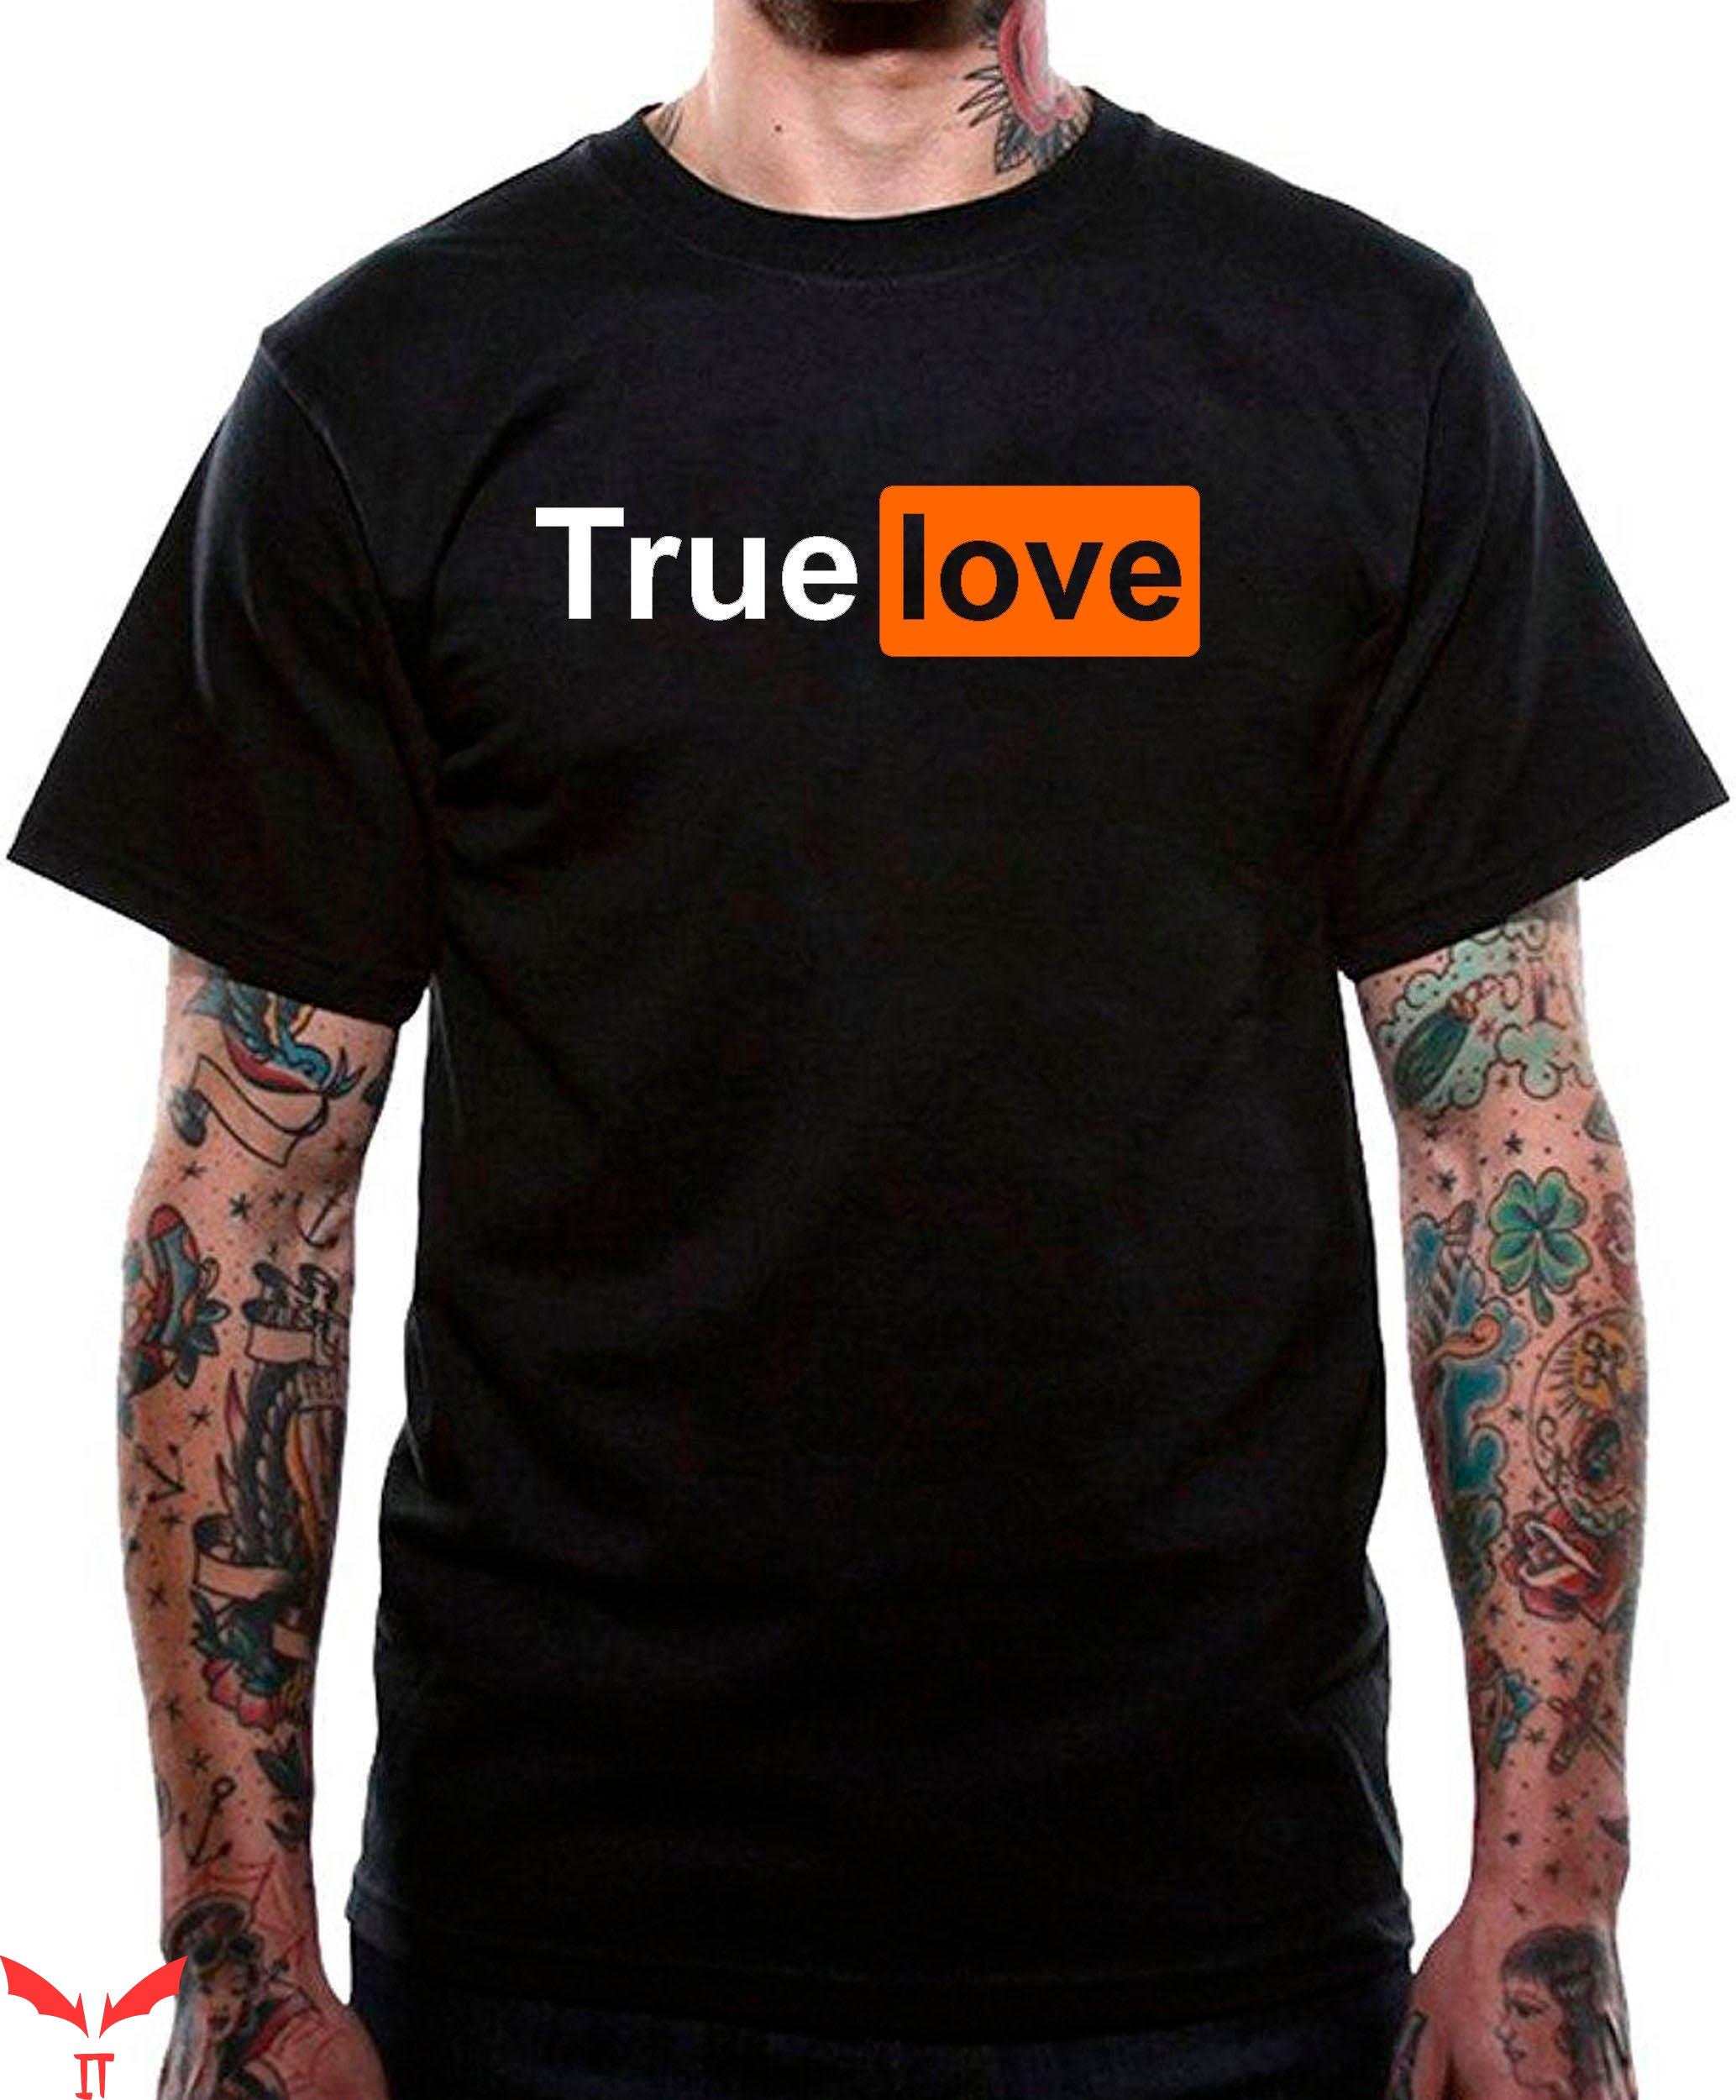 Porn Hub T-Shirt True Love Sexual Funny Adult Meme picture pic